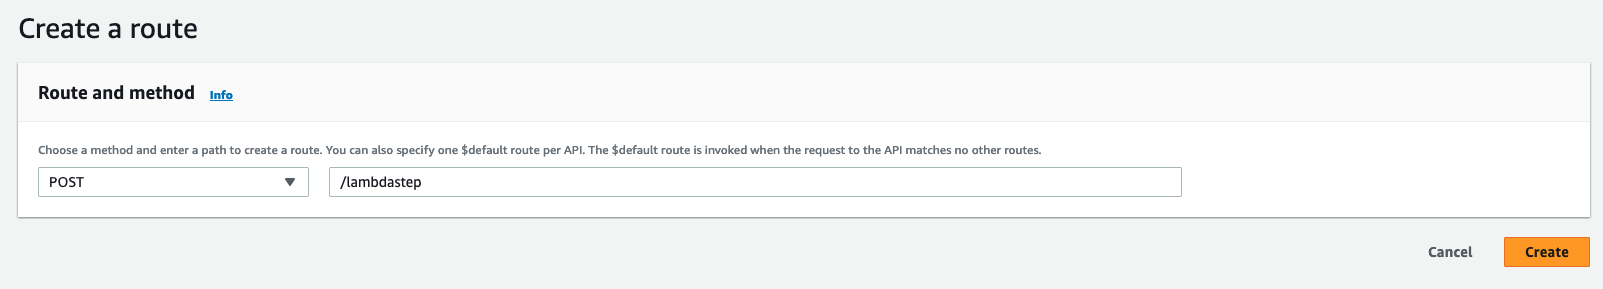 9 - Create new Route for API Gateway